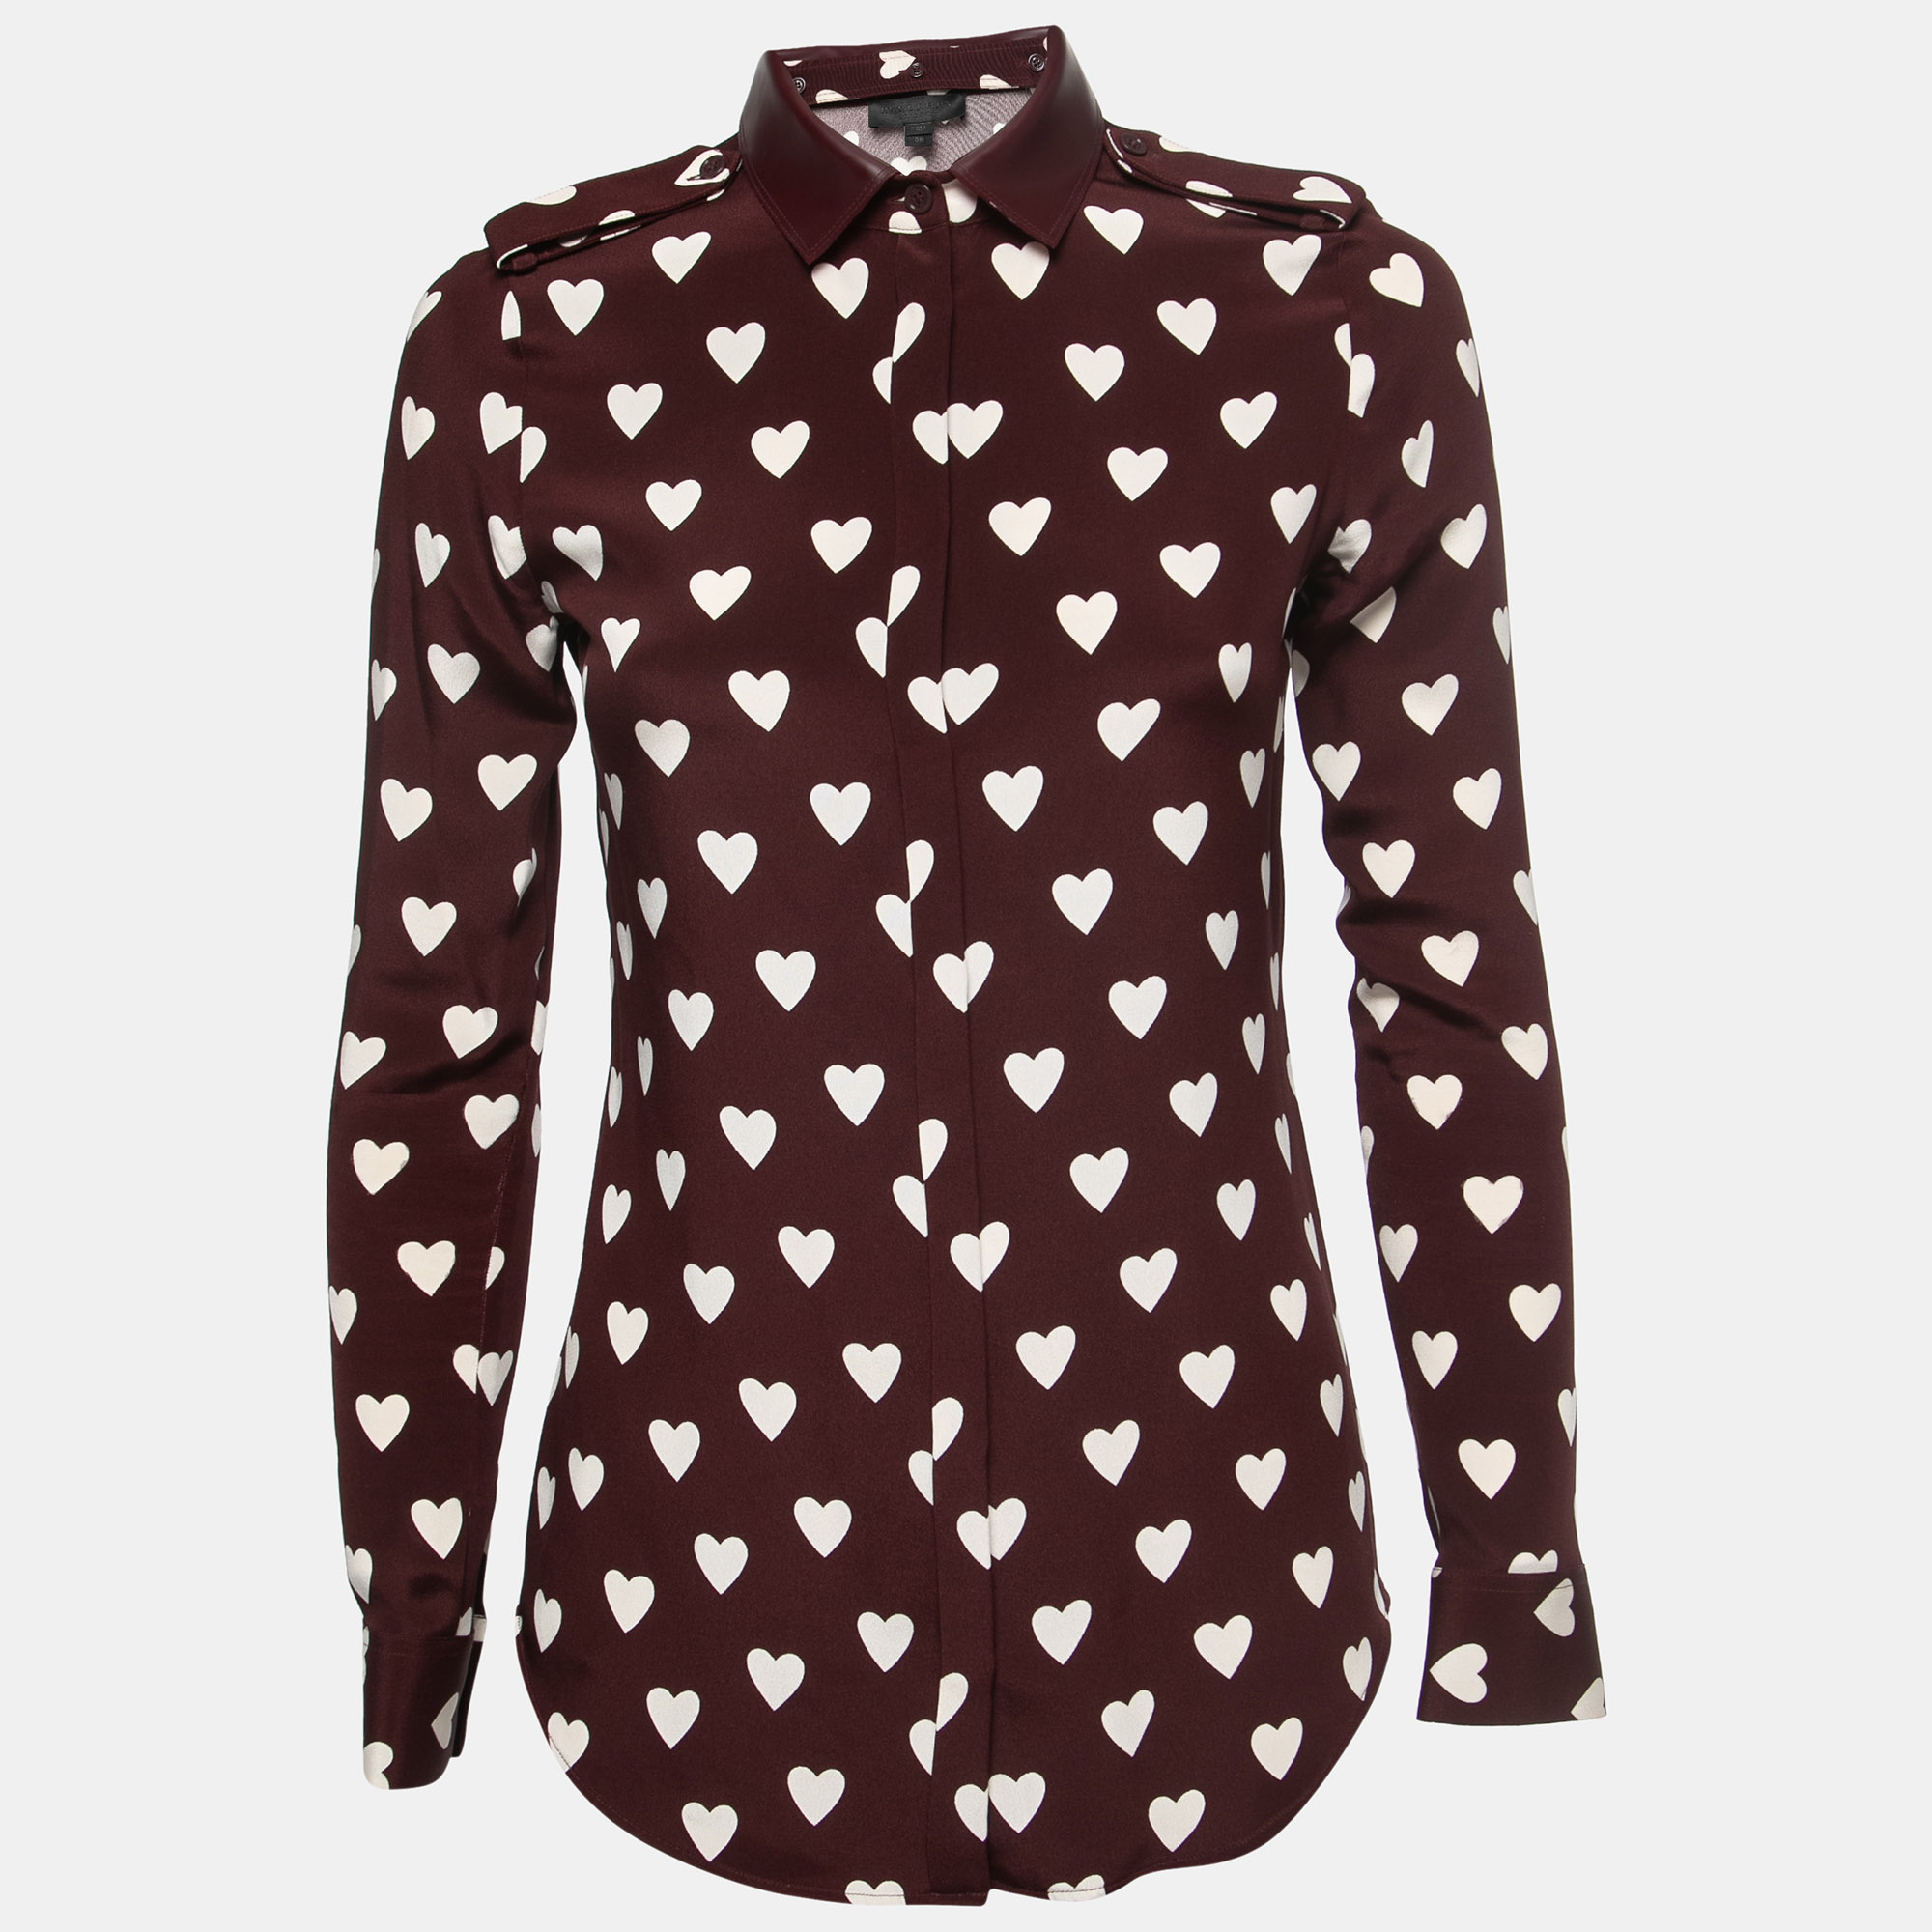 Pre-owned Burberry Prorsum Burgundy Heart Printed Silk Collared Shirt S